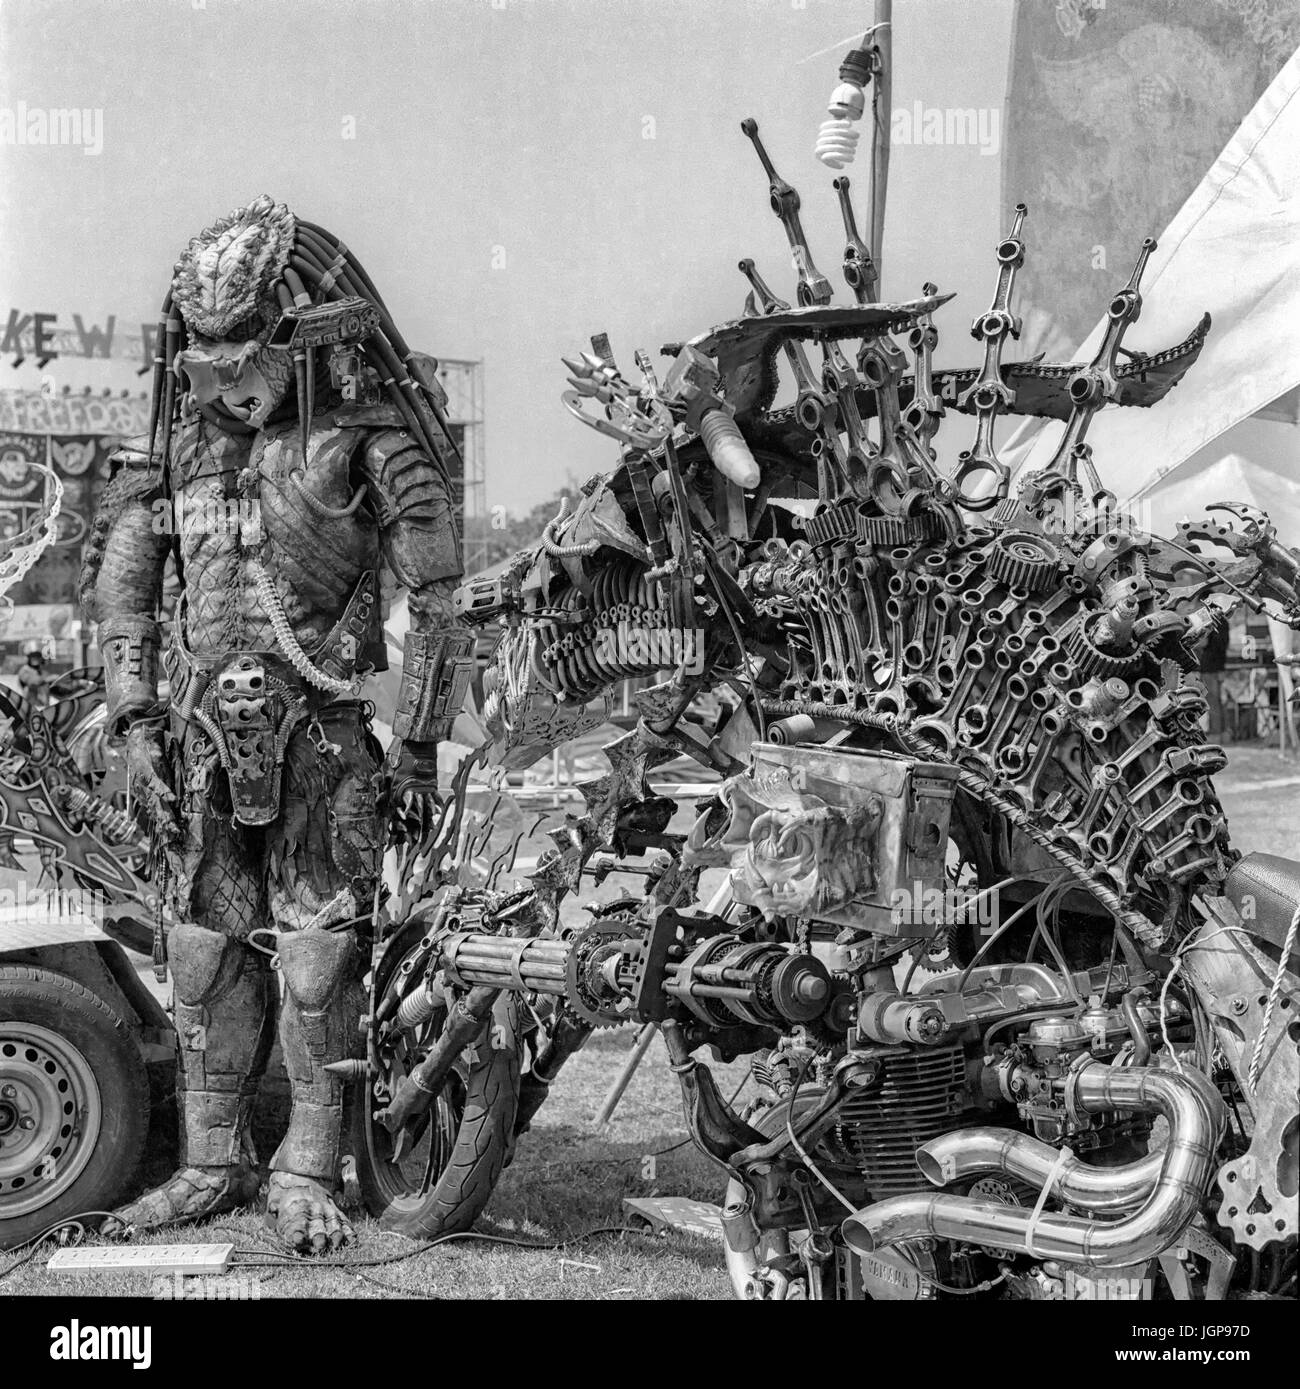 'Predator' alien movie character built of metalwork parts and featuring extreme modified motorcycle. black and white photography. Stock Photo